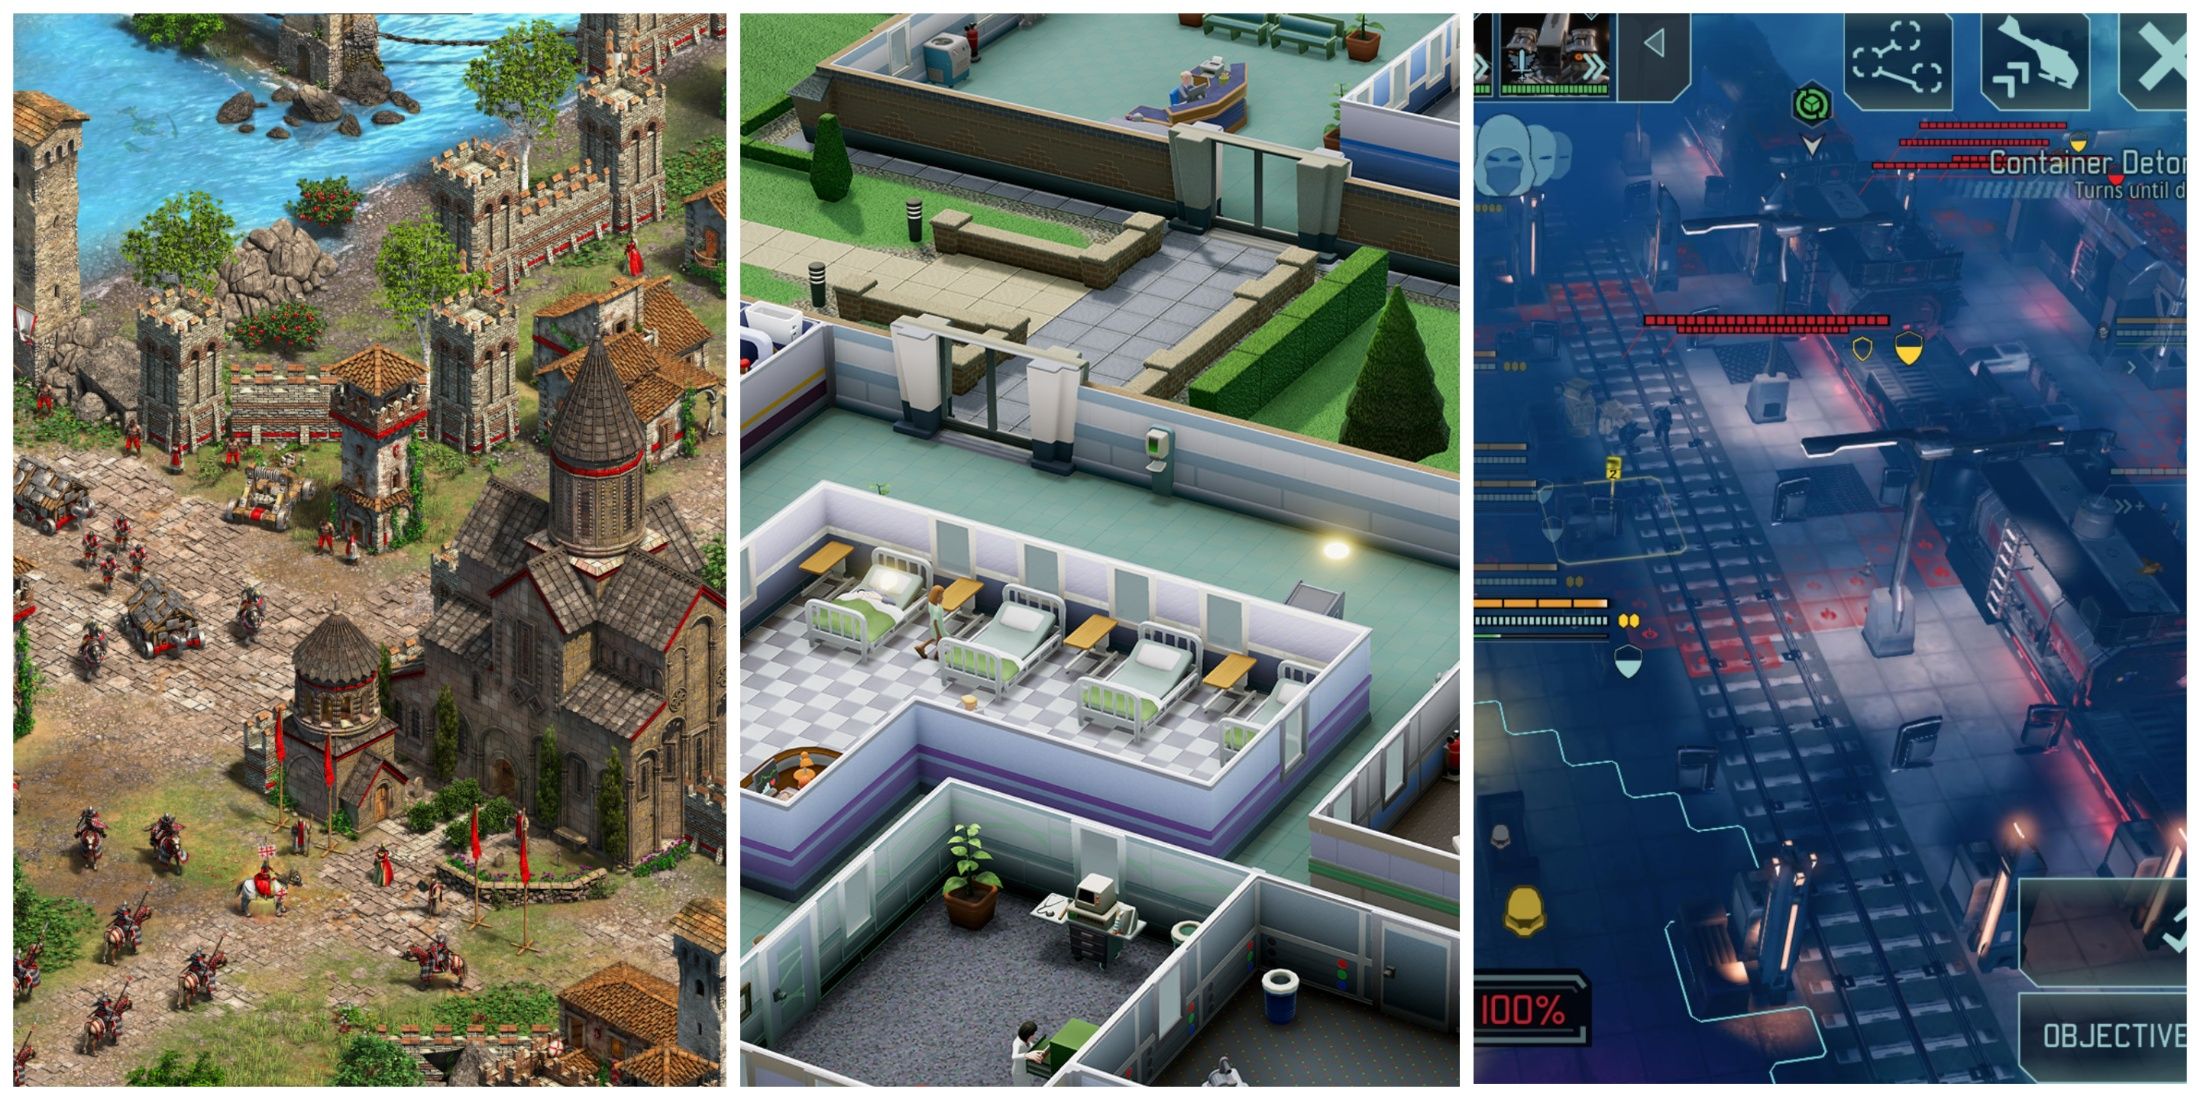 Screenshots from Age of Empires 2, Two Point Hospital, and XCOM 2